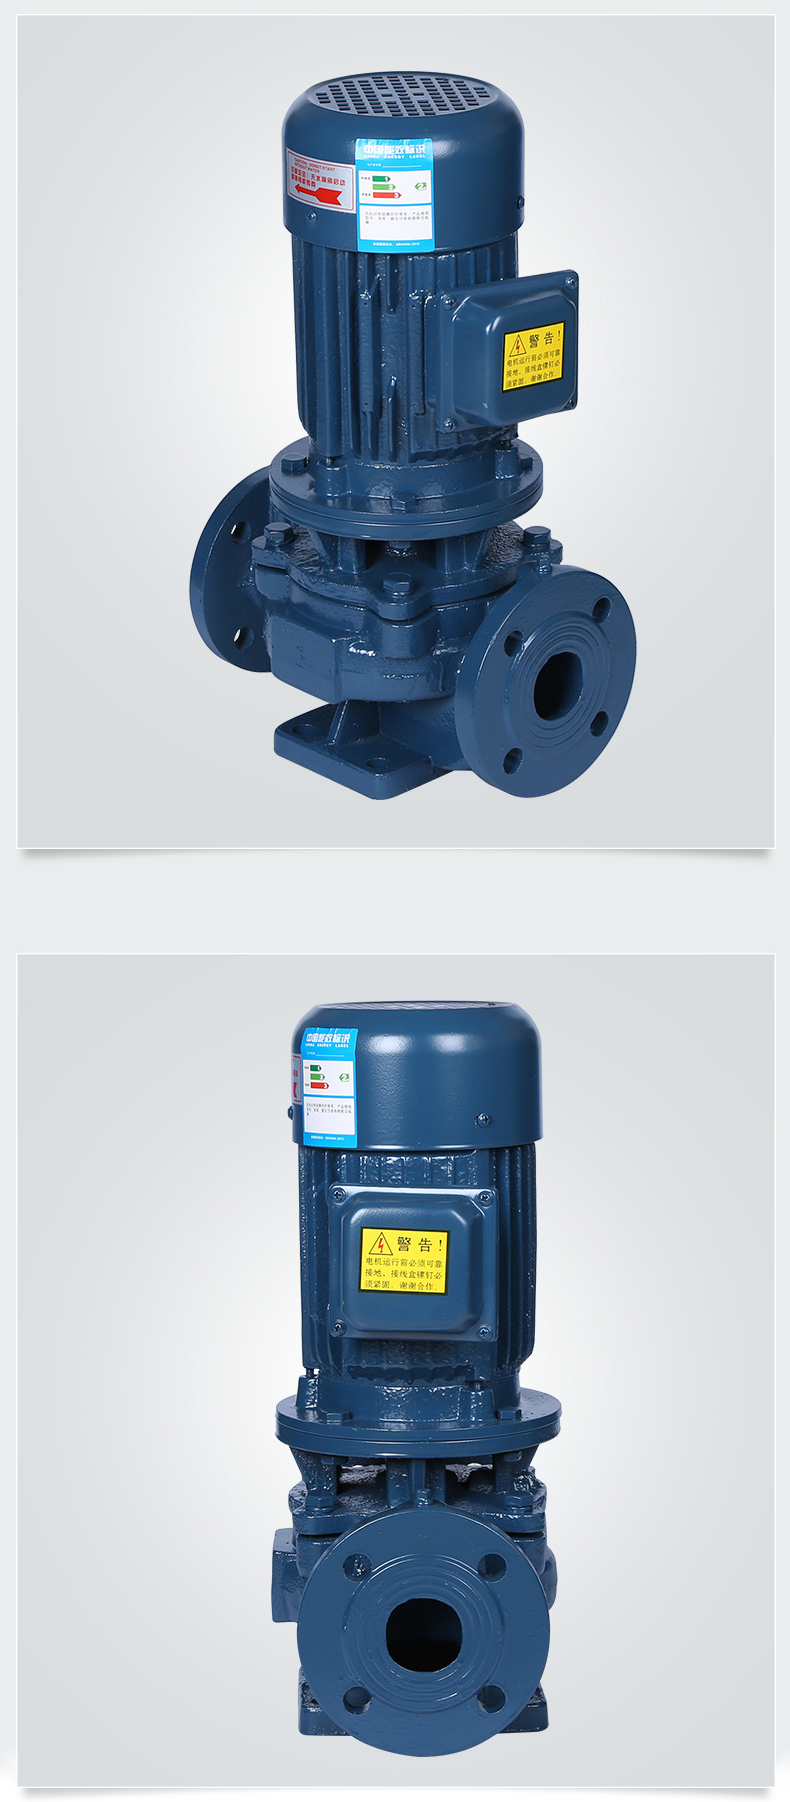 IRG Hot Water Circulation Single Stage Vertical Pipeline Pump